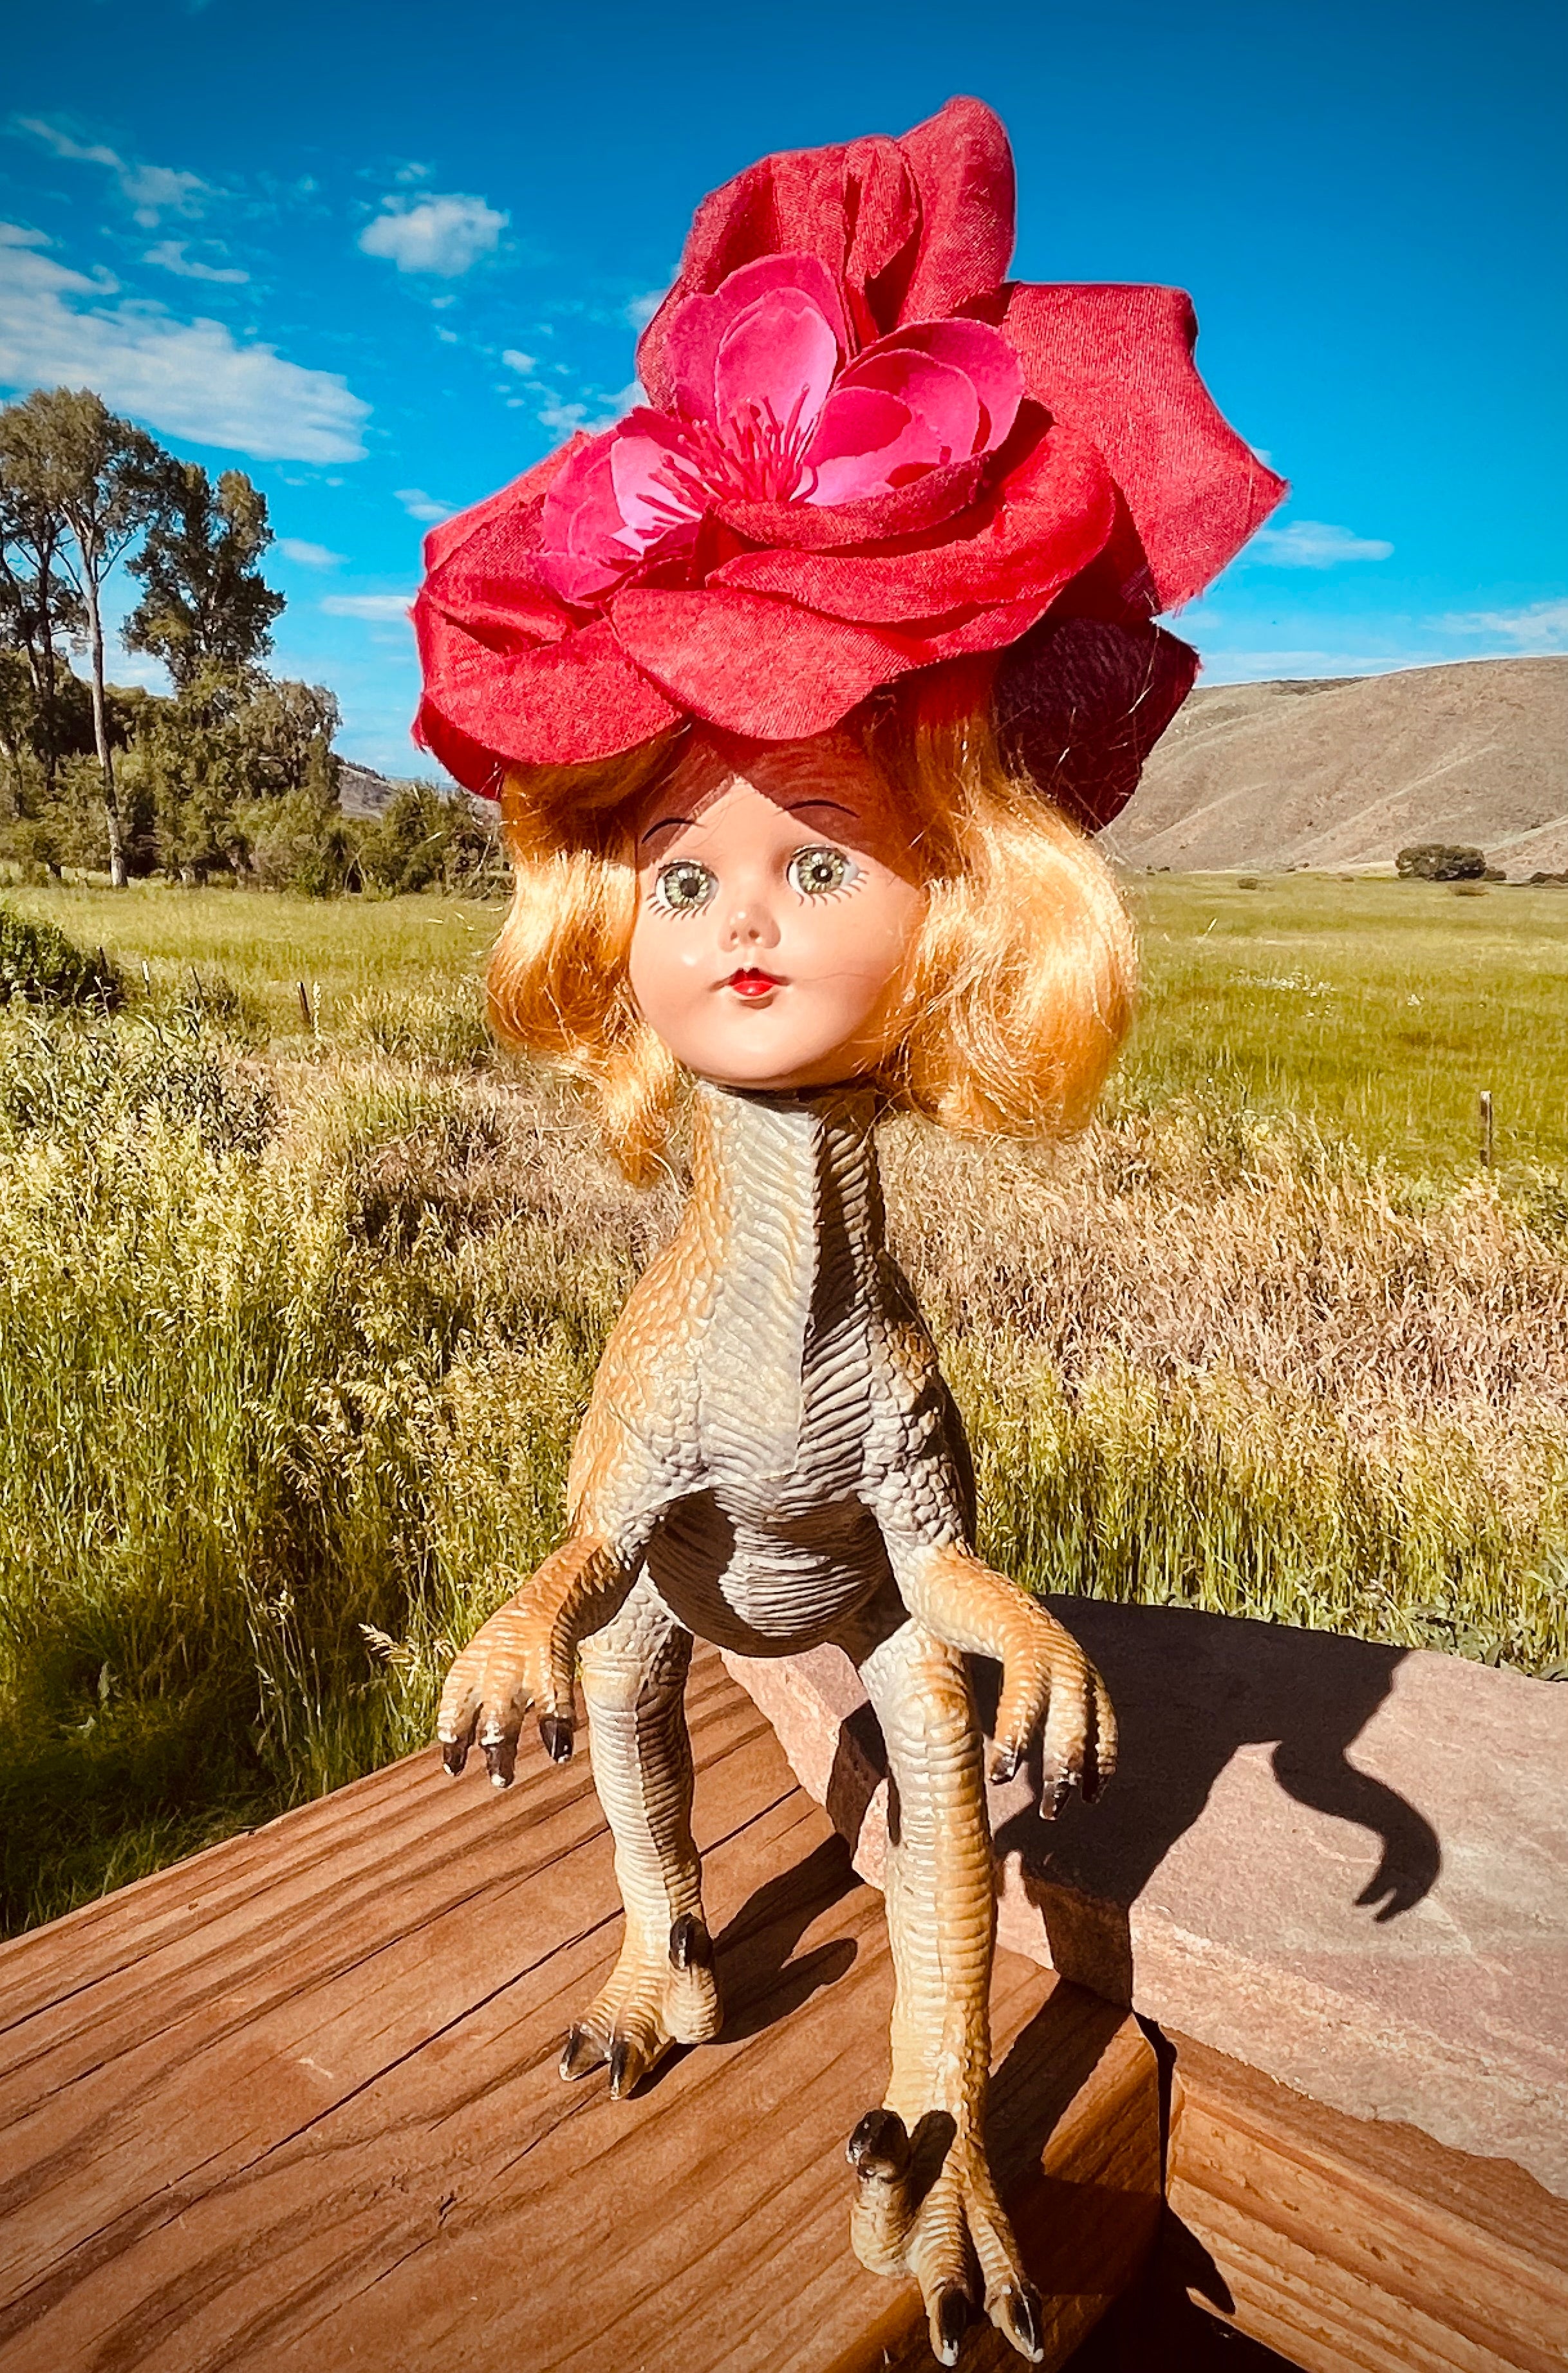 Vintage toy dinosaur with vintage doll head and flower headdress. 11" tall by 9" long and 4" across.